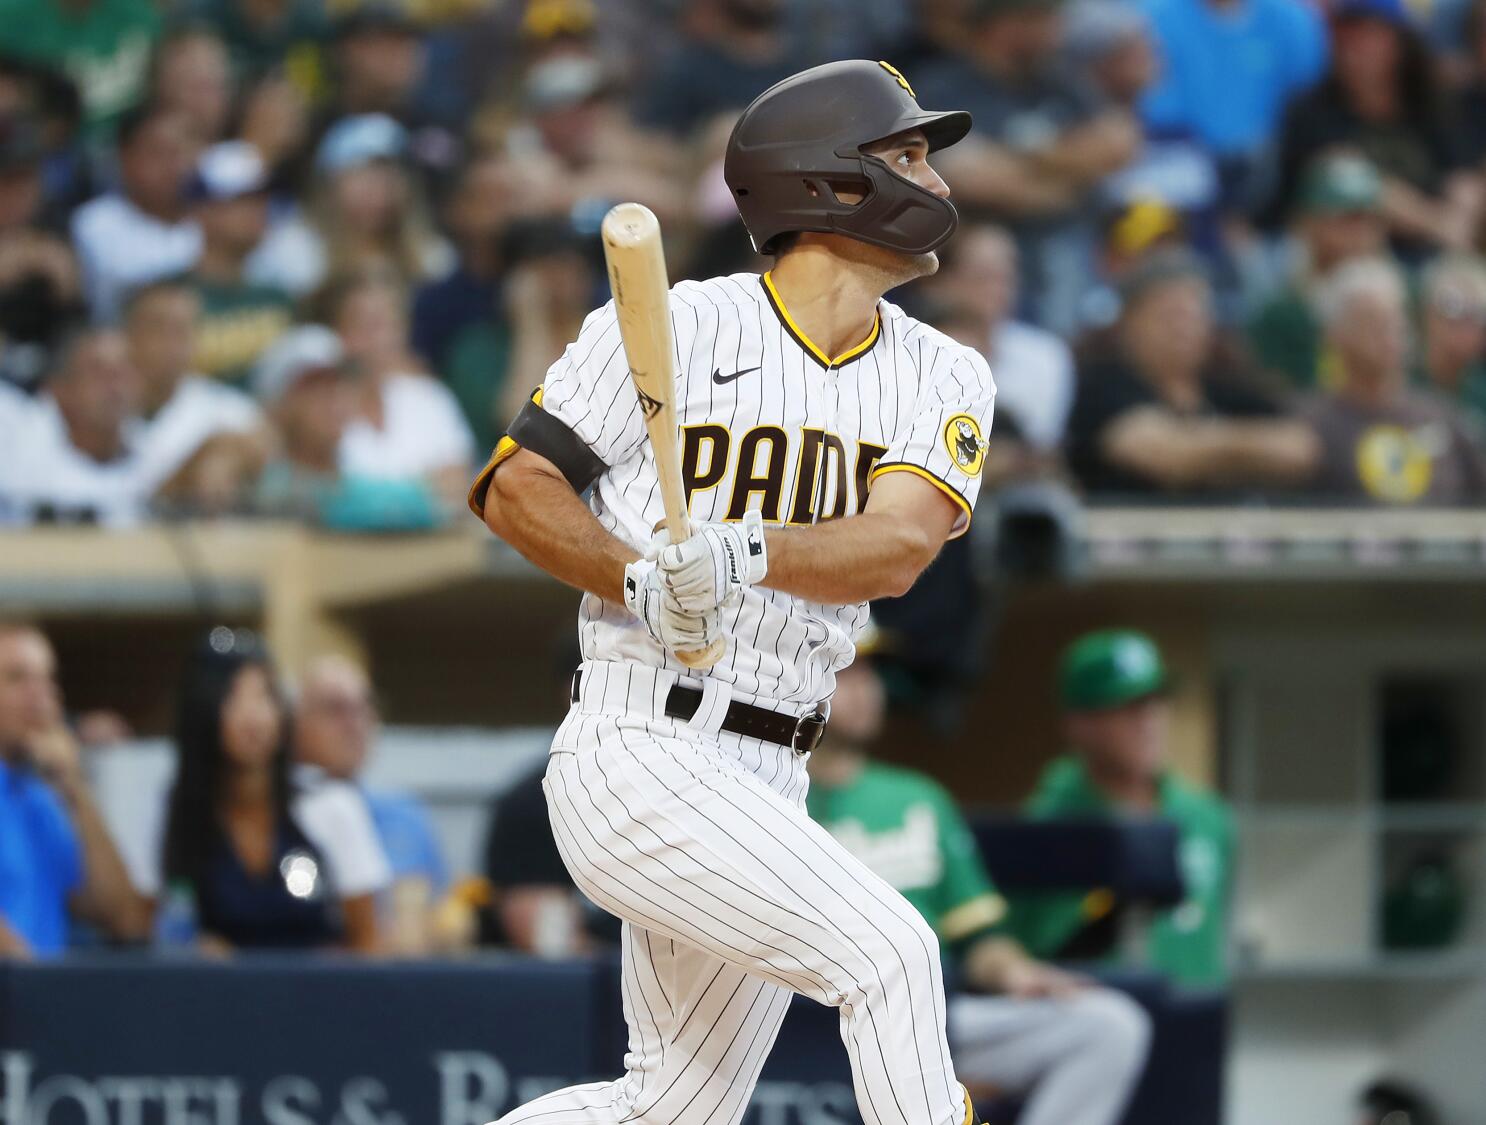 A complete breakdown of new Padres' hitter Adam Frazier